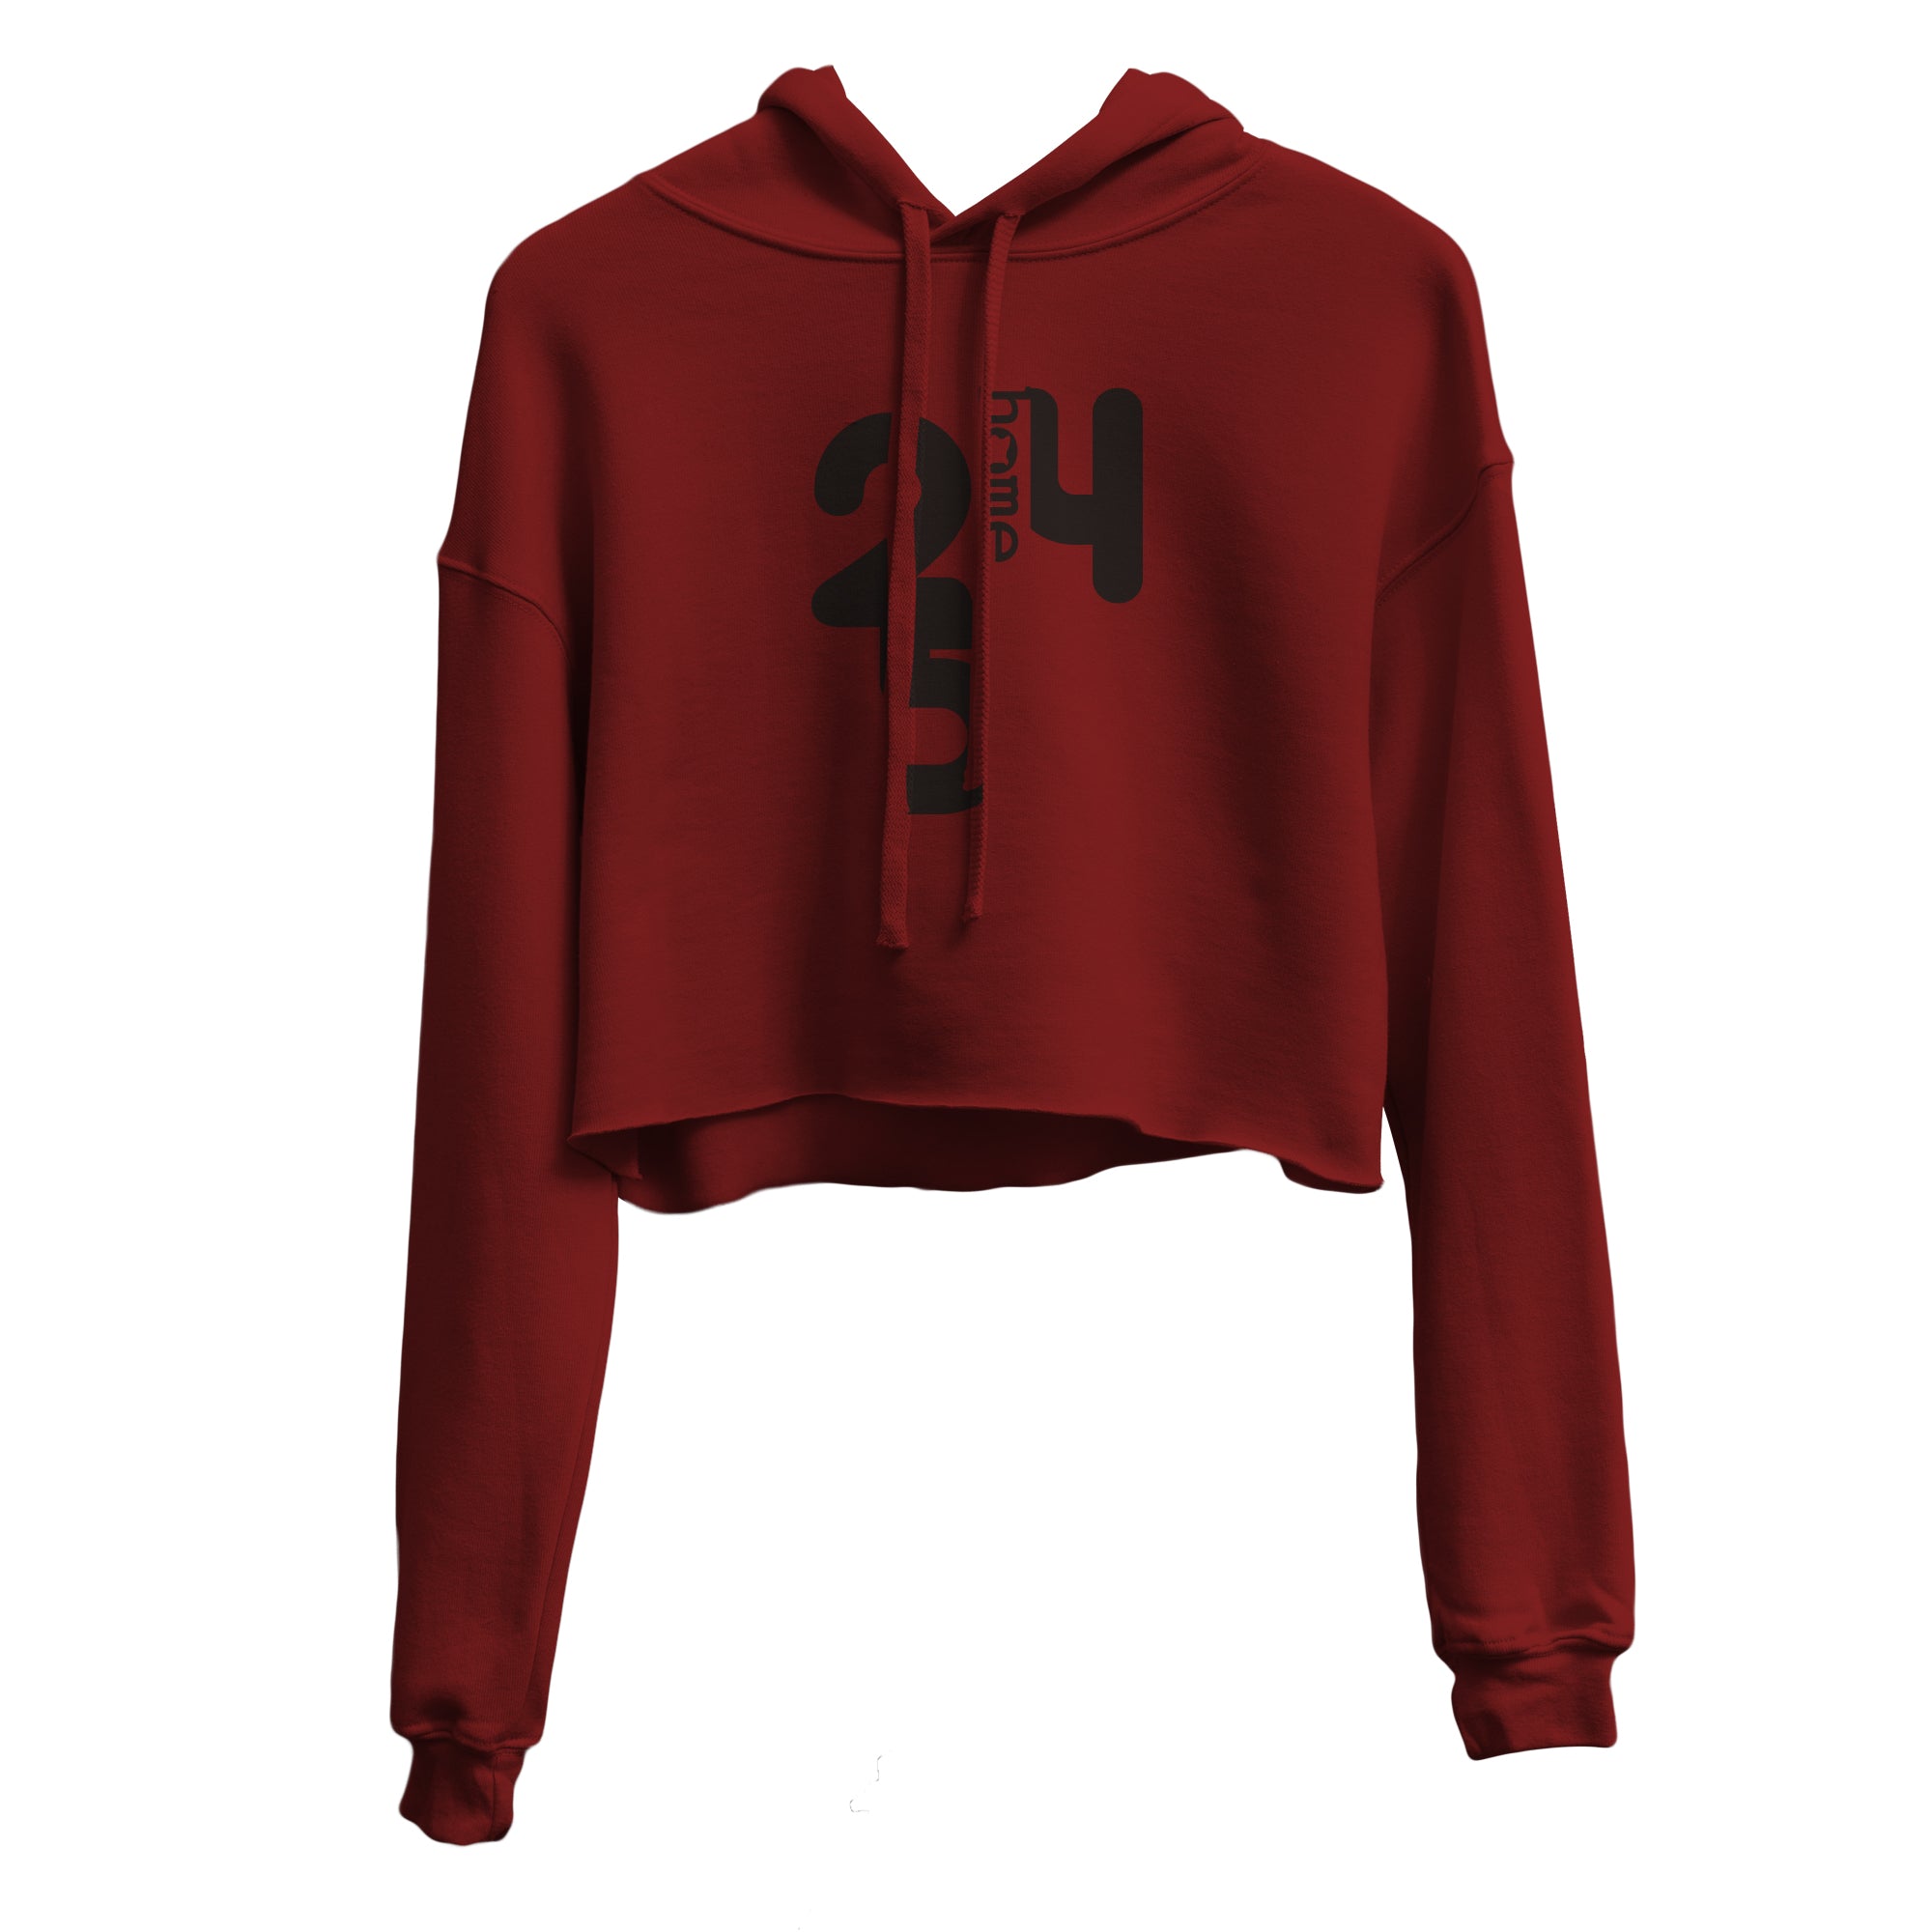 JBEEJURA DESINGZ | home_254 burgundy Cropped Hoodie (mid heavy fabric) with a black the 254 logo